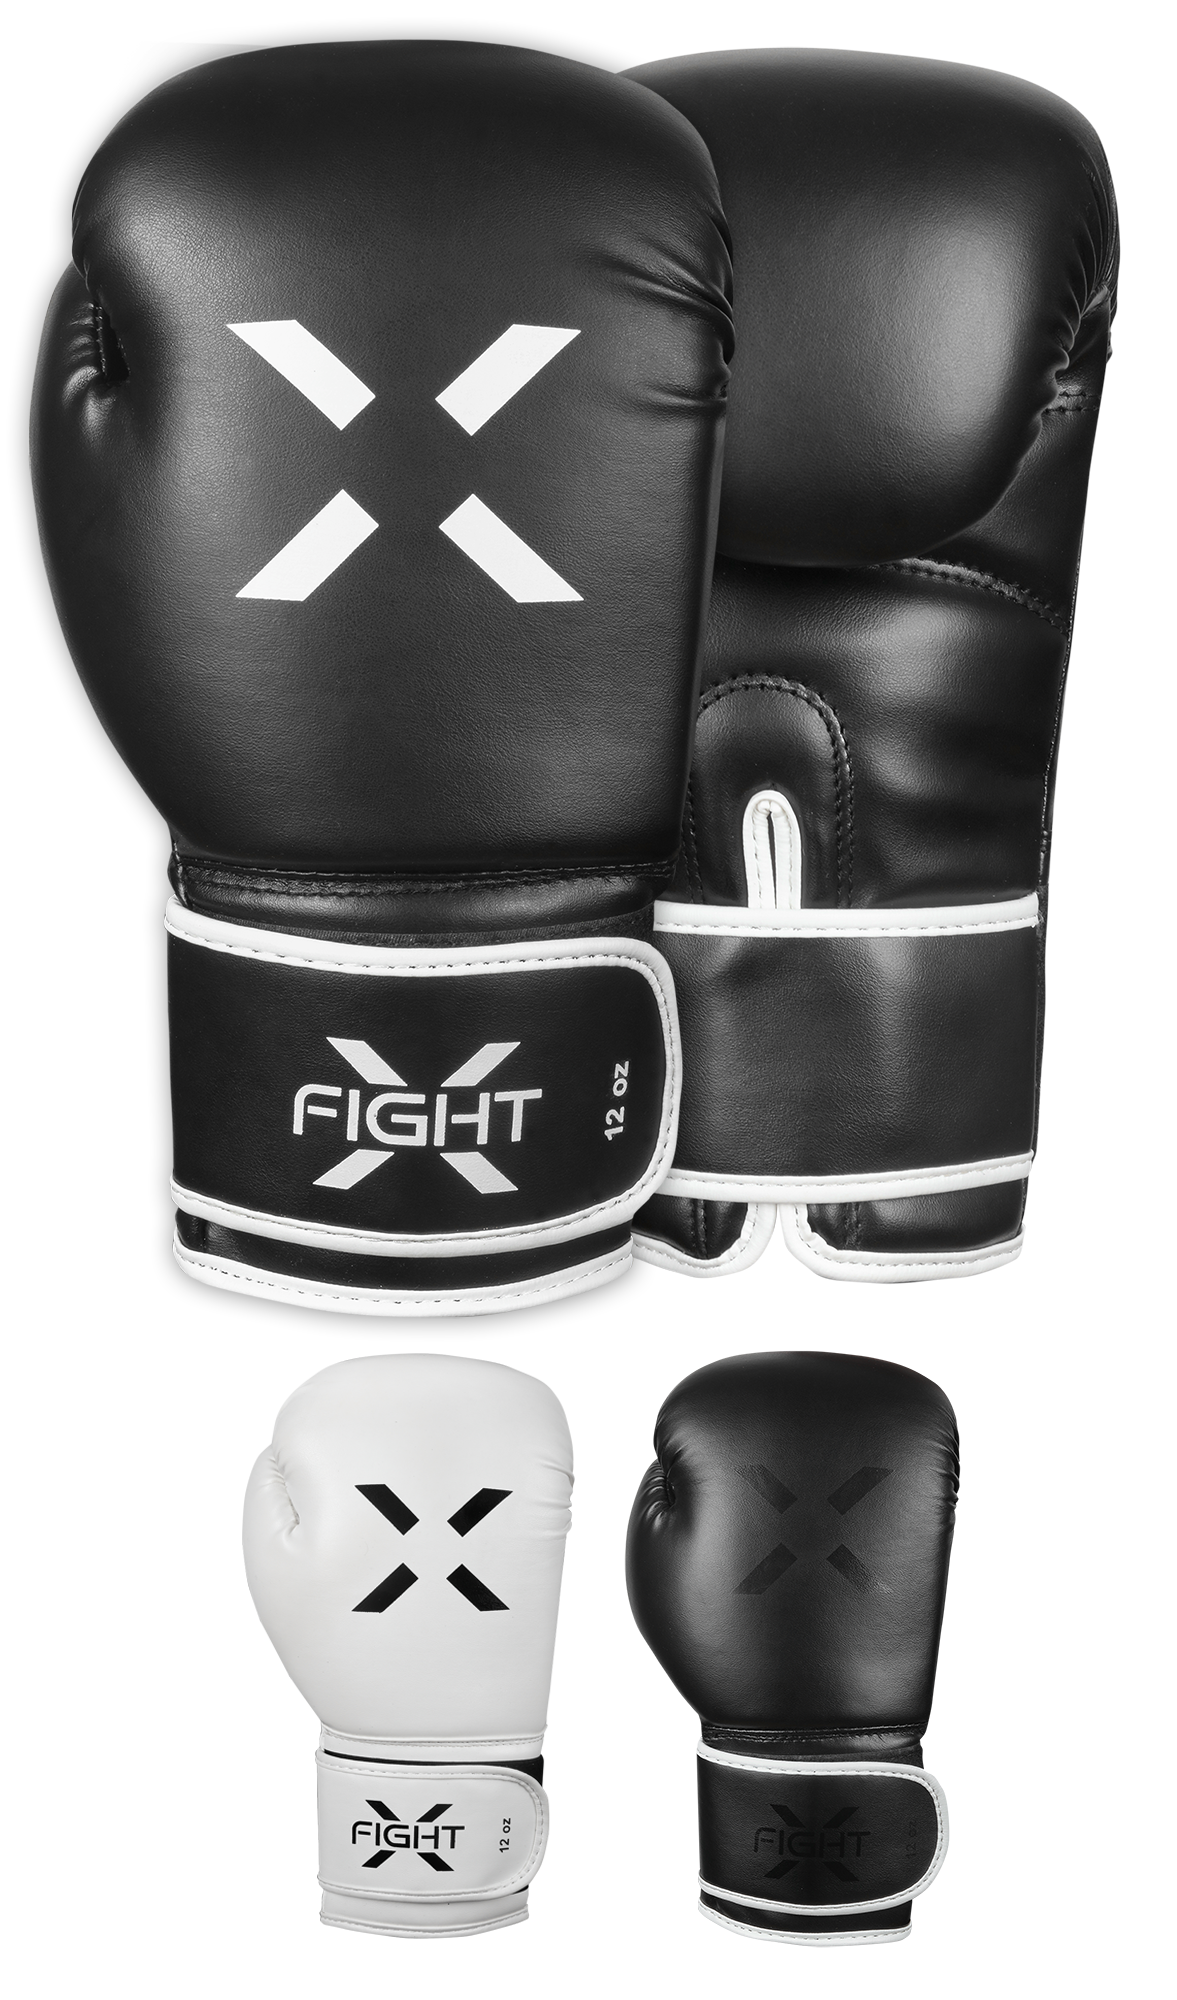 Learn how to choose your boxing gloves